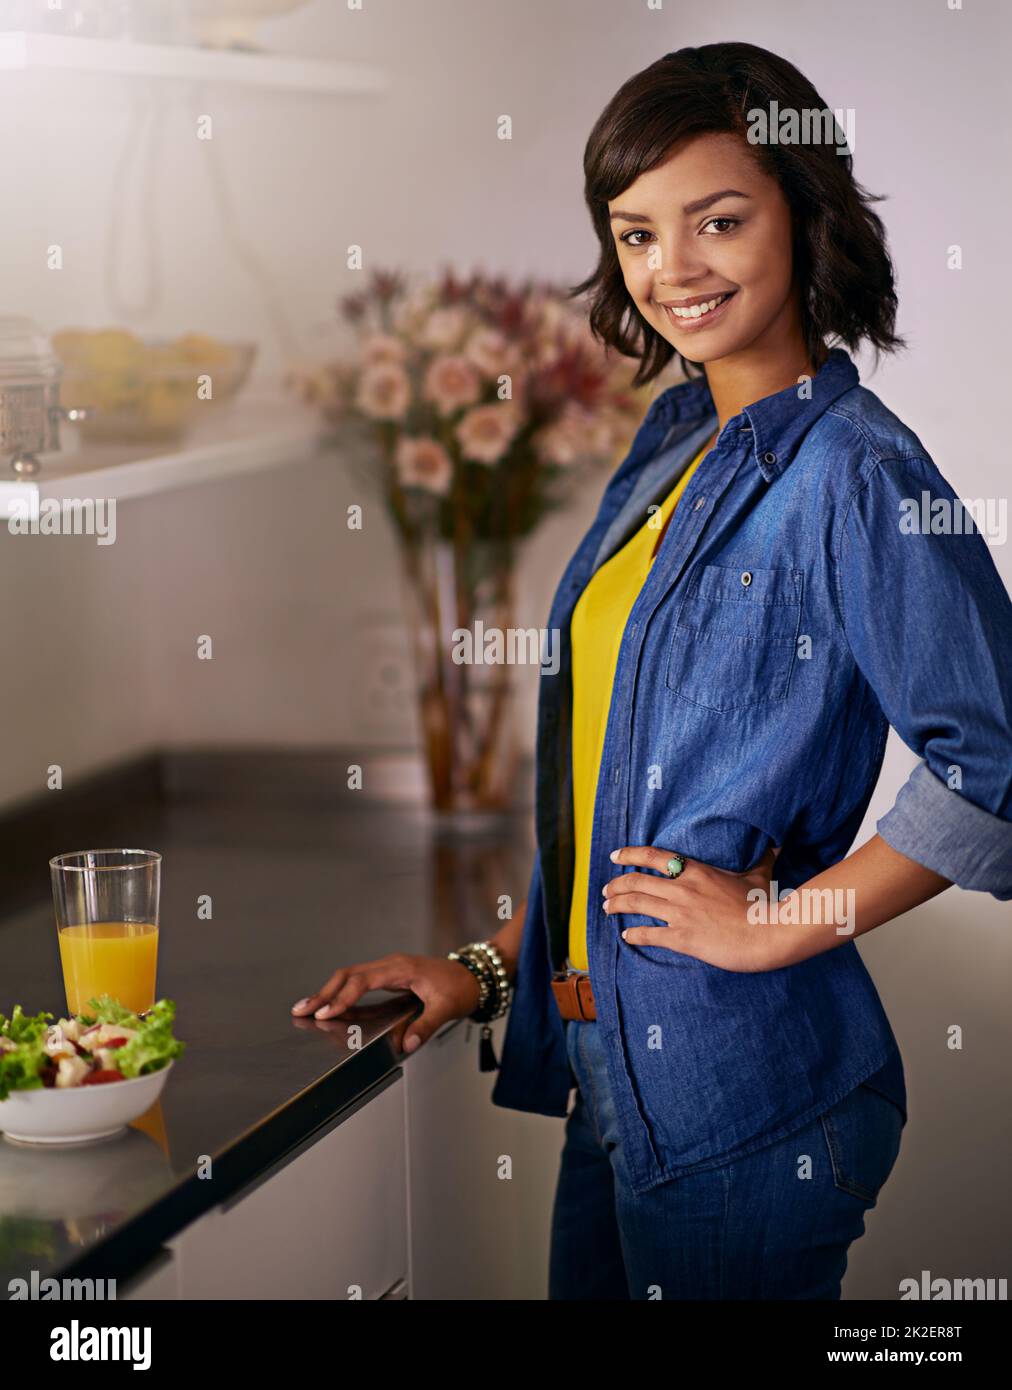 Anytime is salad time. Portrait of a young woman about to have a healthy salad at home. Stock Photo